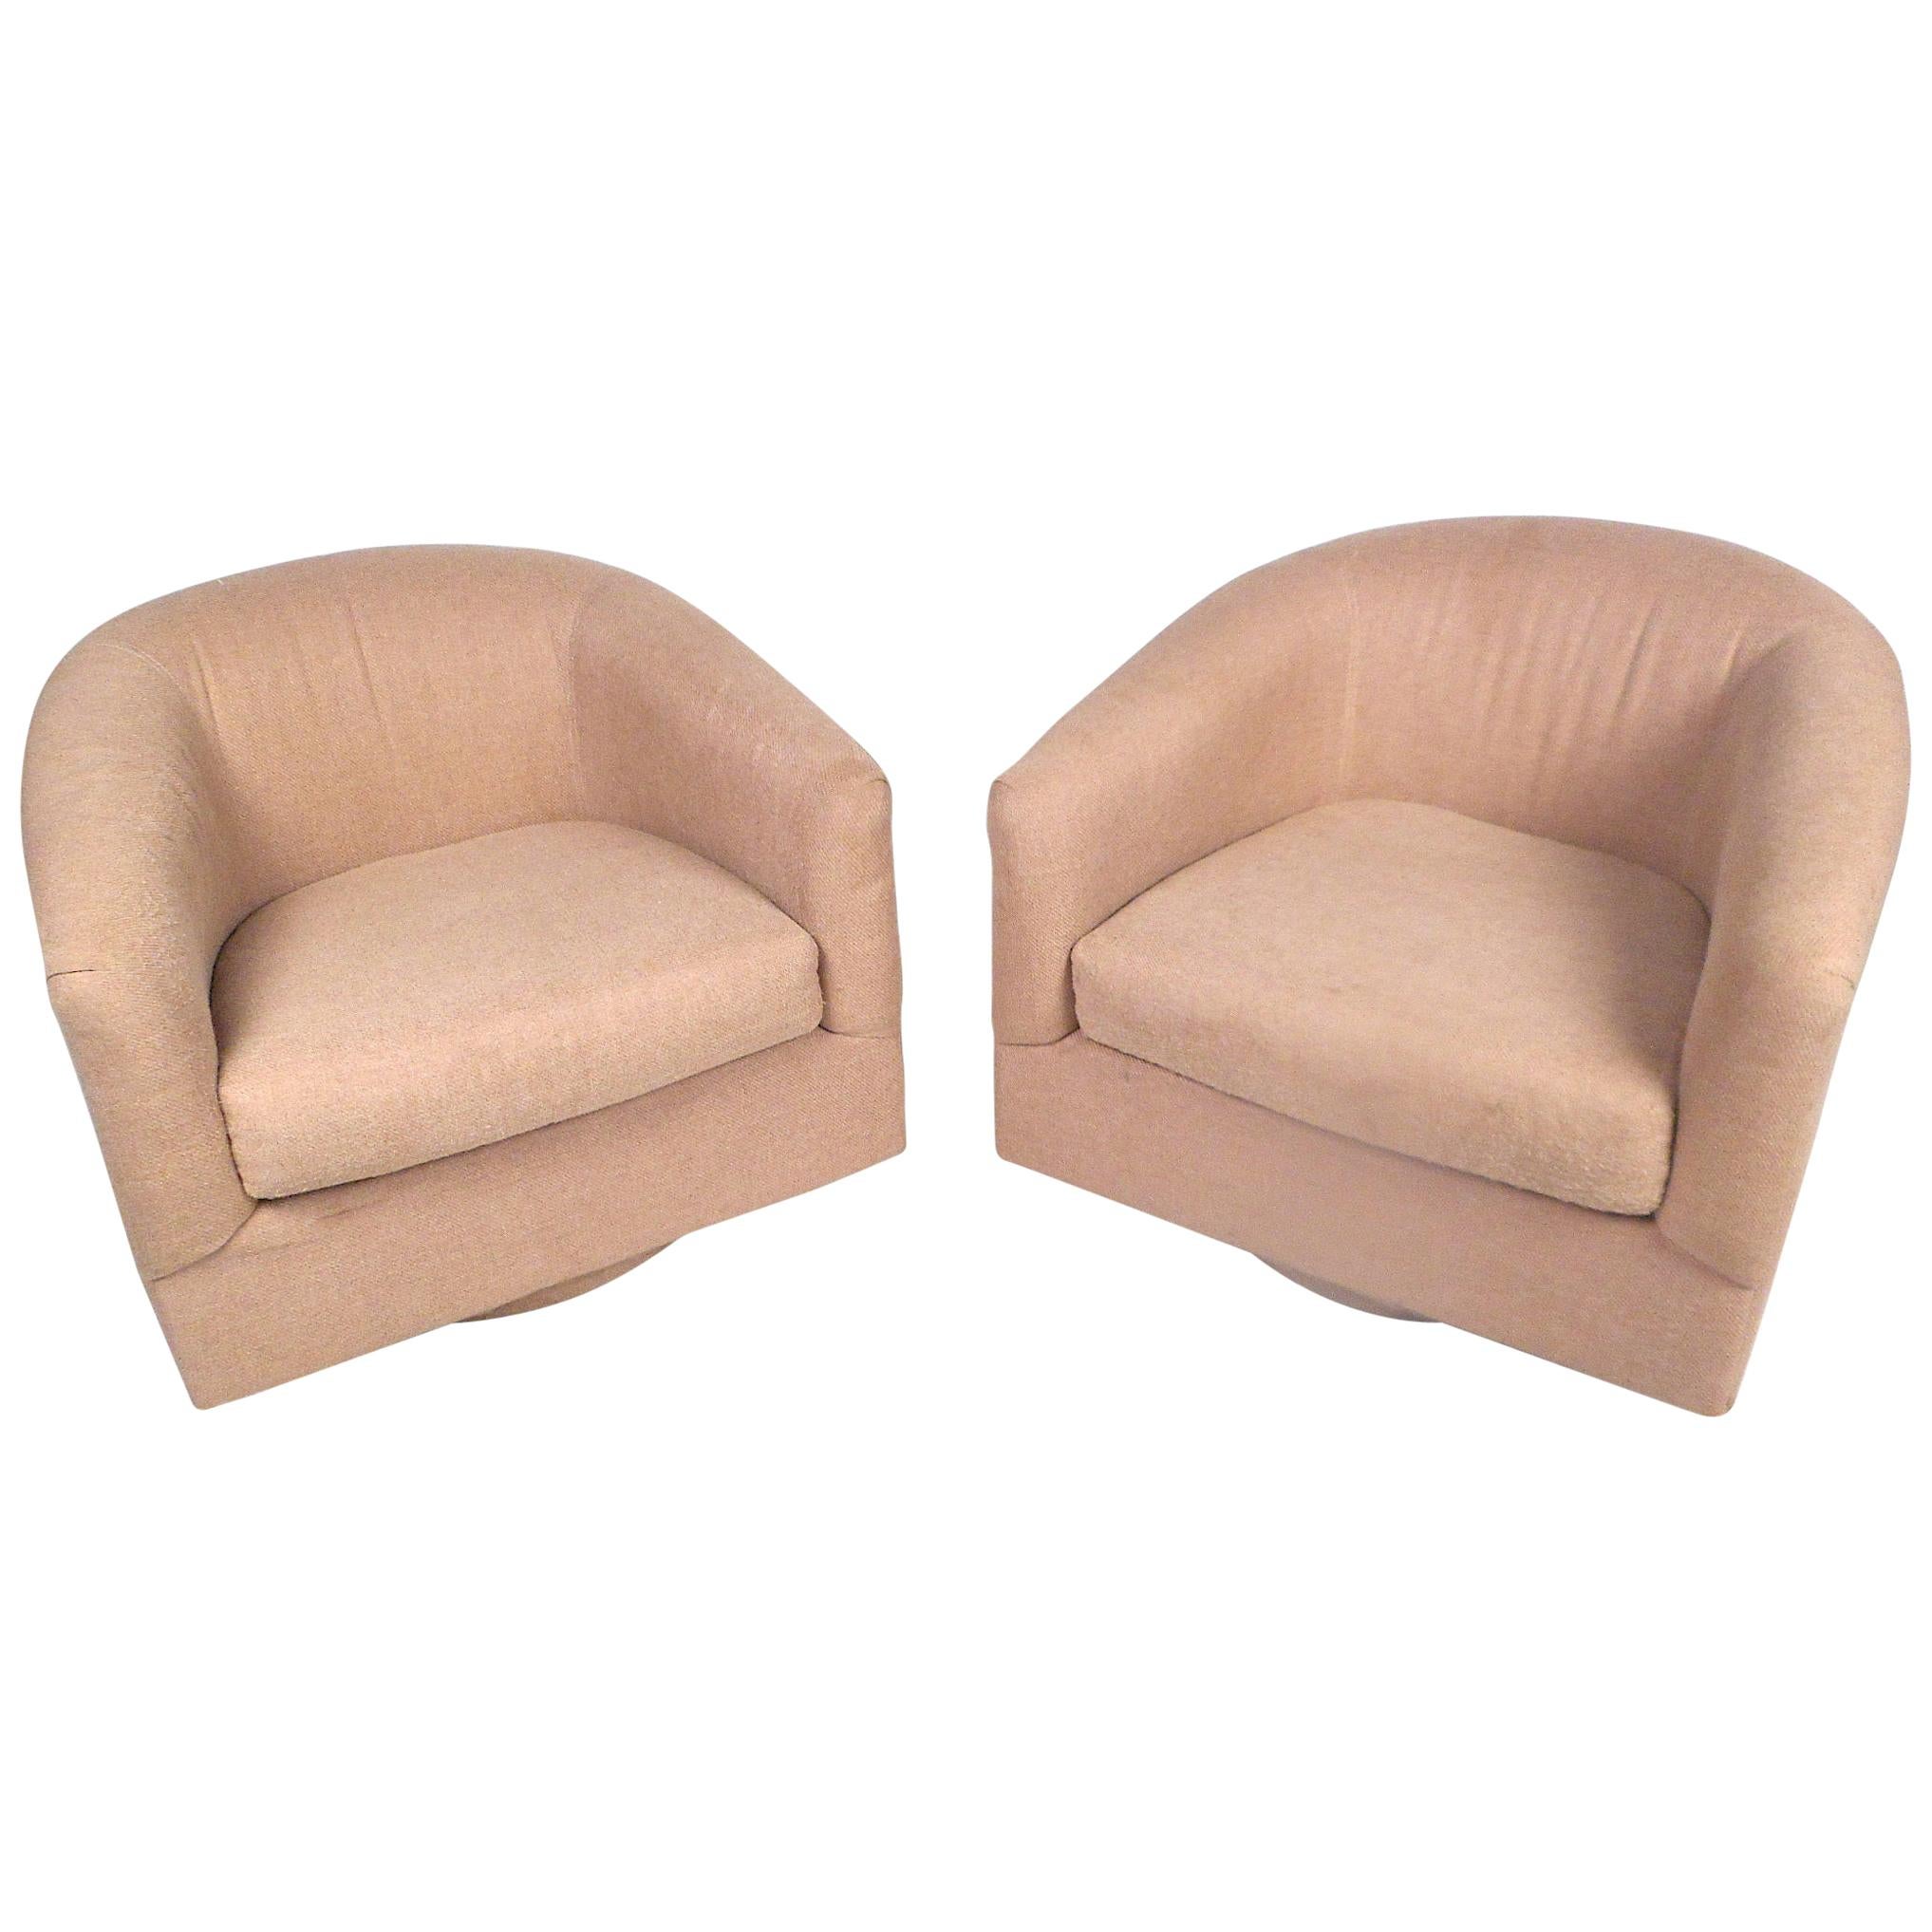 Vintage Modern Swiveling Lounge Chairs, a Pair